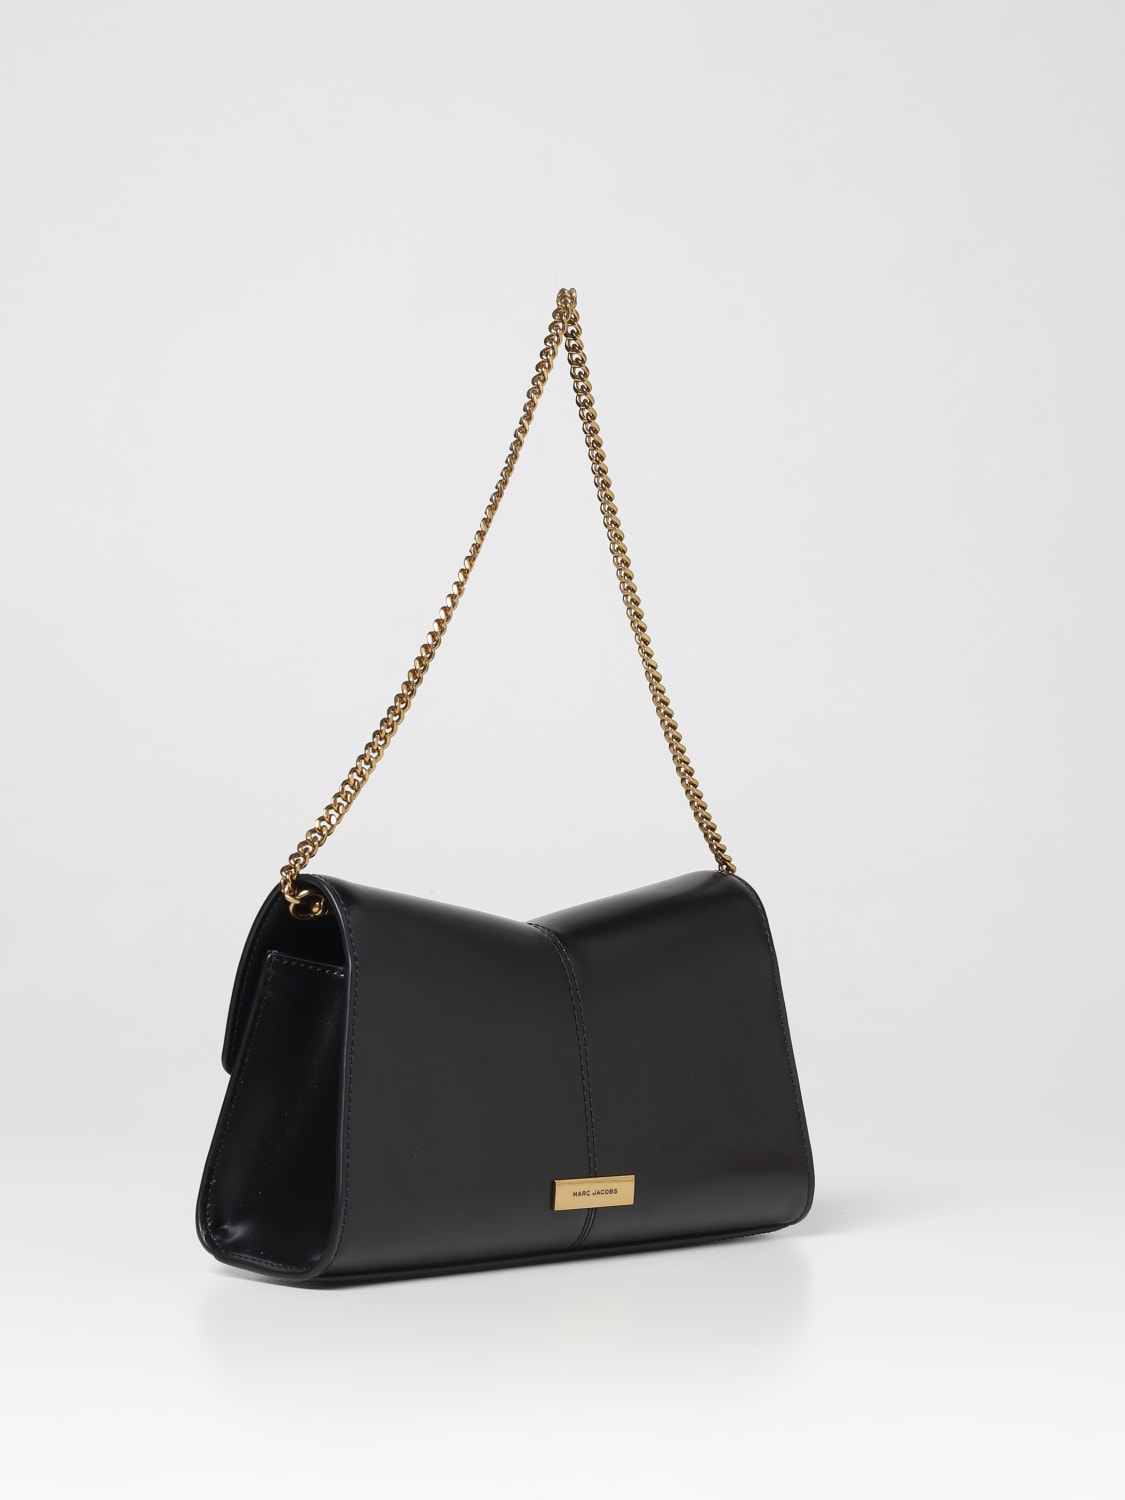 Marc By Marc Jacobs Black Leather Signature Clutch